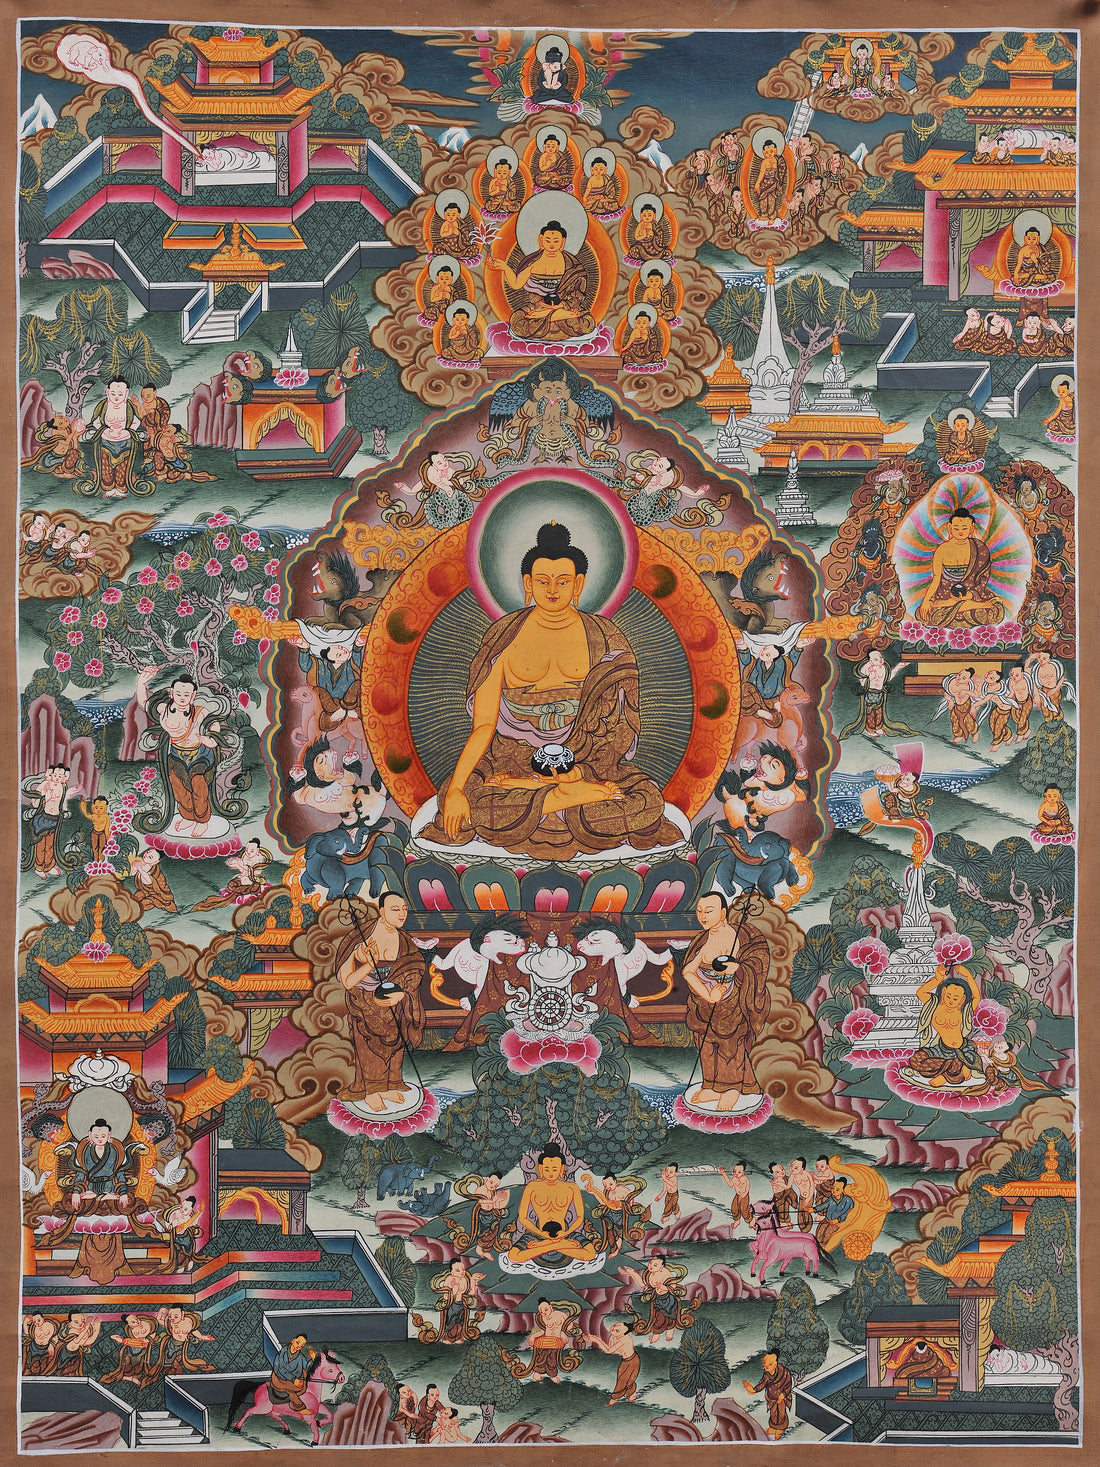 Twelve significant episodes in the life of the Buddha